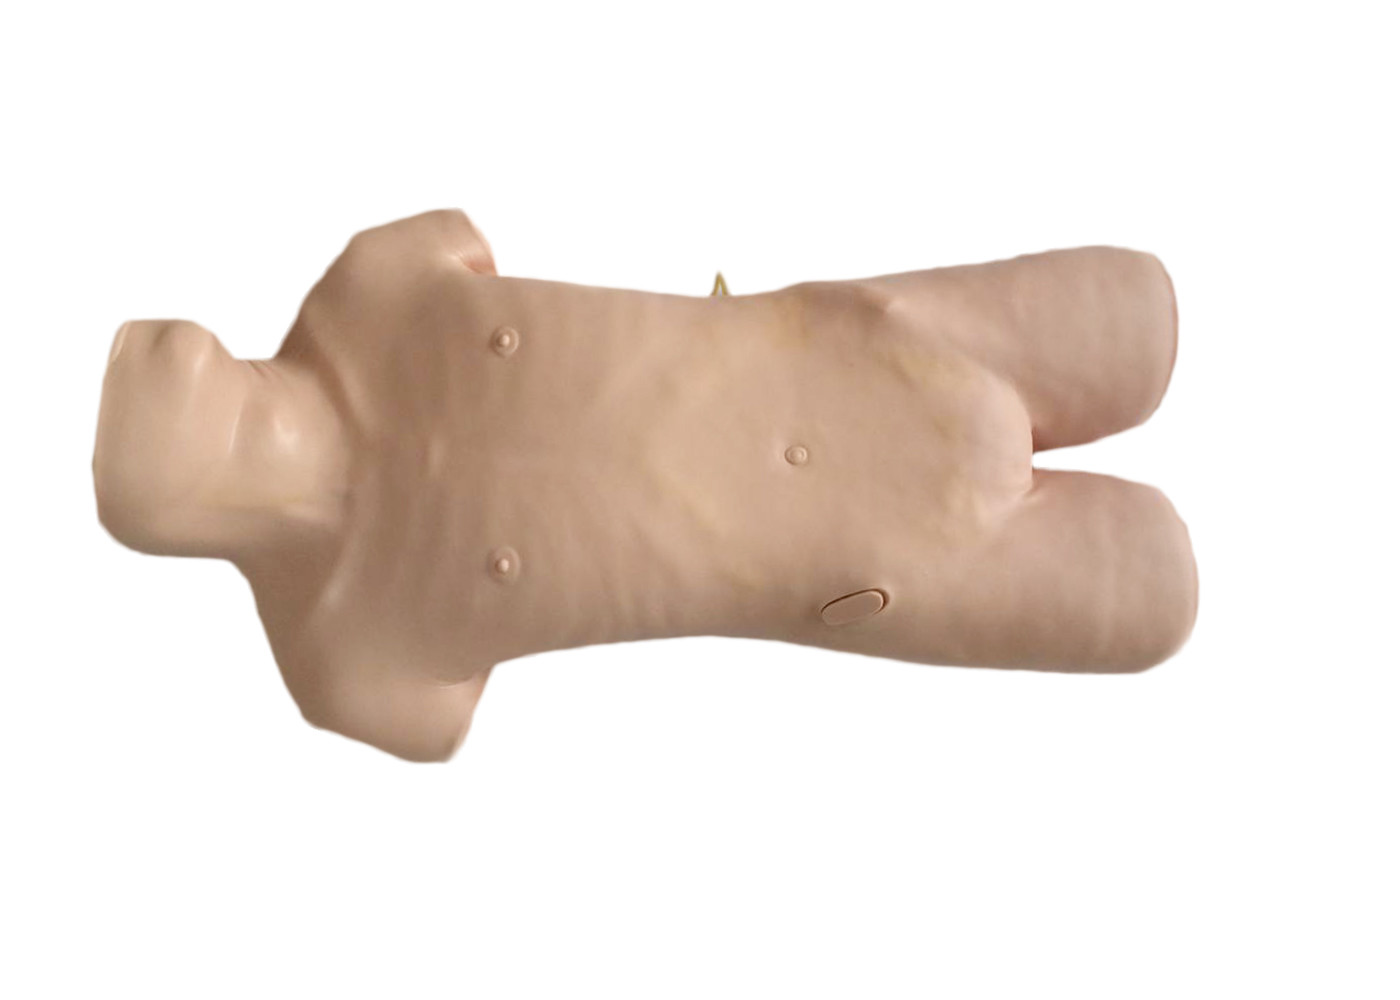 Realistic Upper Body Clinical Simulation Abdominocentesis Manikin for Puncture Practice